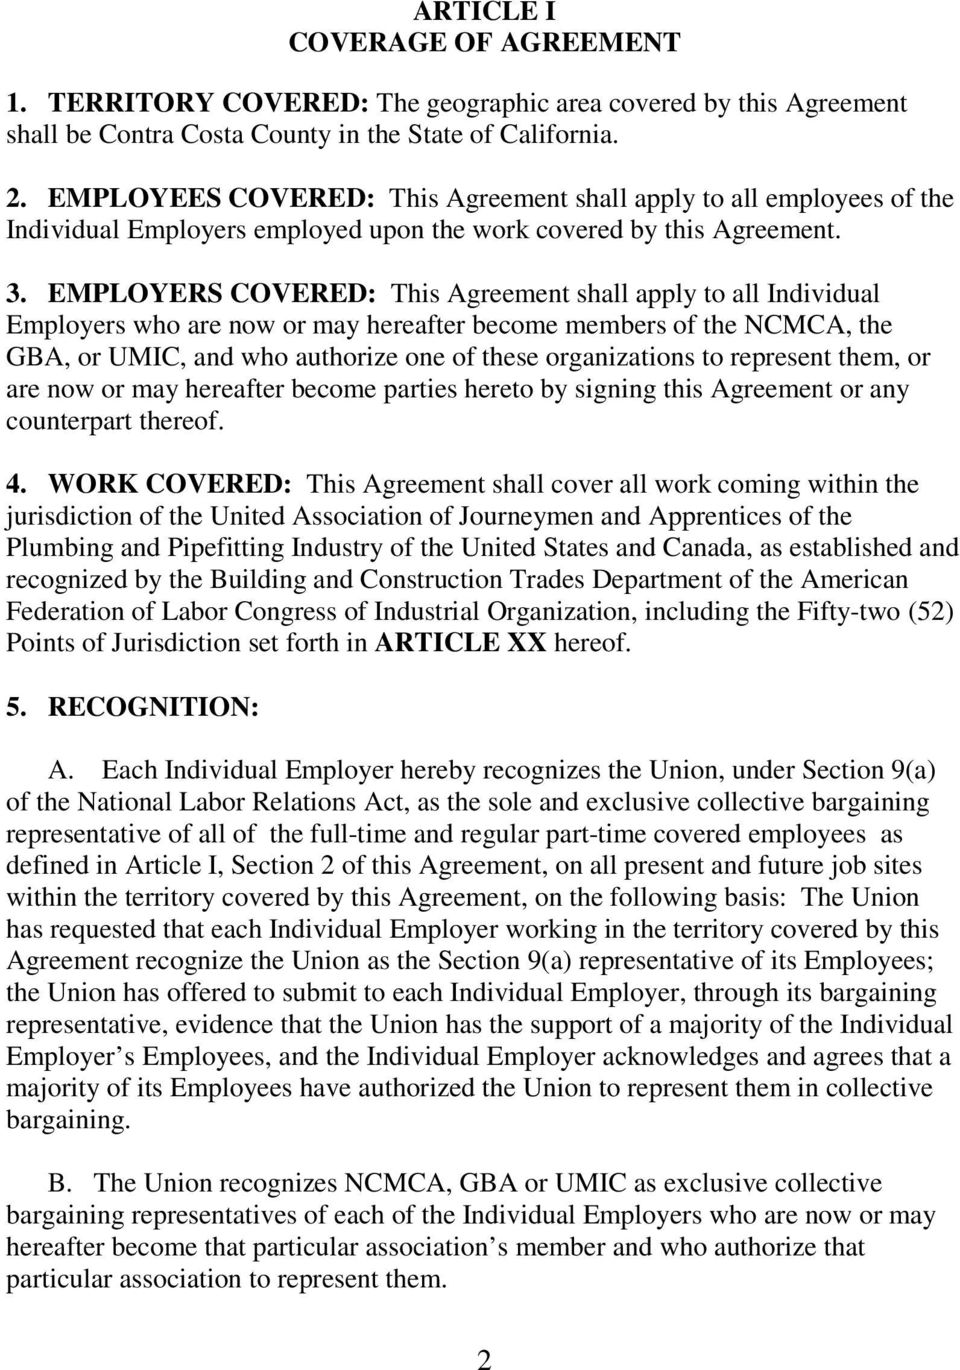 EMPLOYERS COVERED: This Agreement shall apply to all Individual Employers who are now or may hereafter become members of the NCMCA, the GBA, or UMIC, and who authorize one of these organizations to